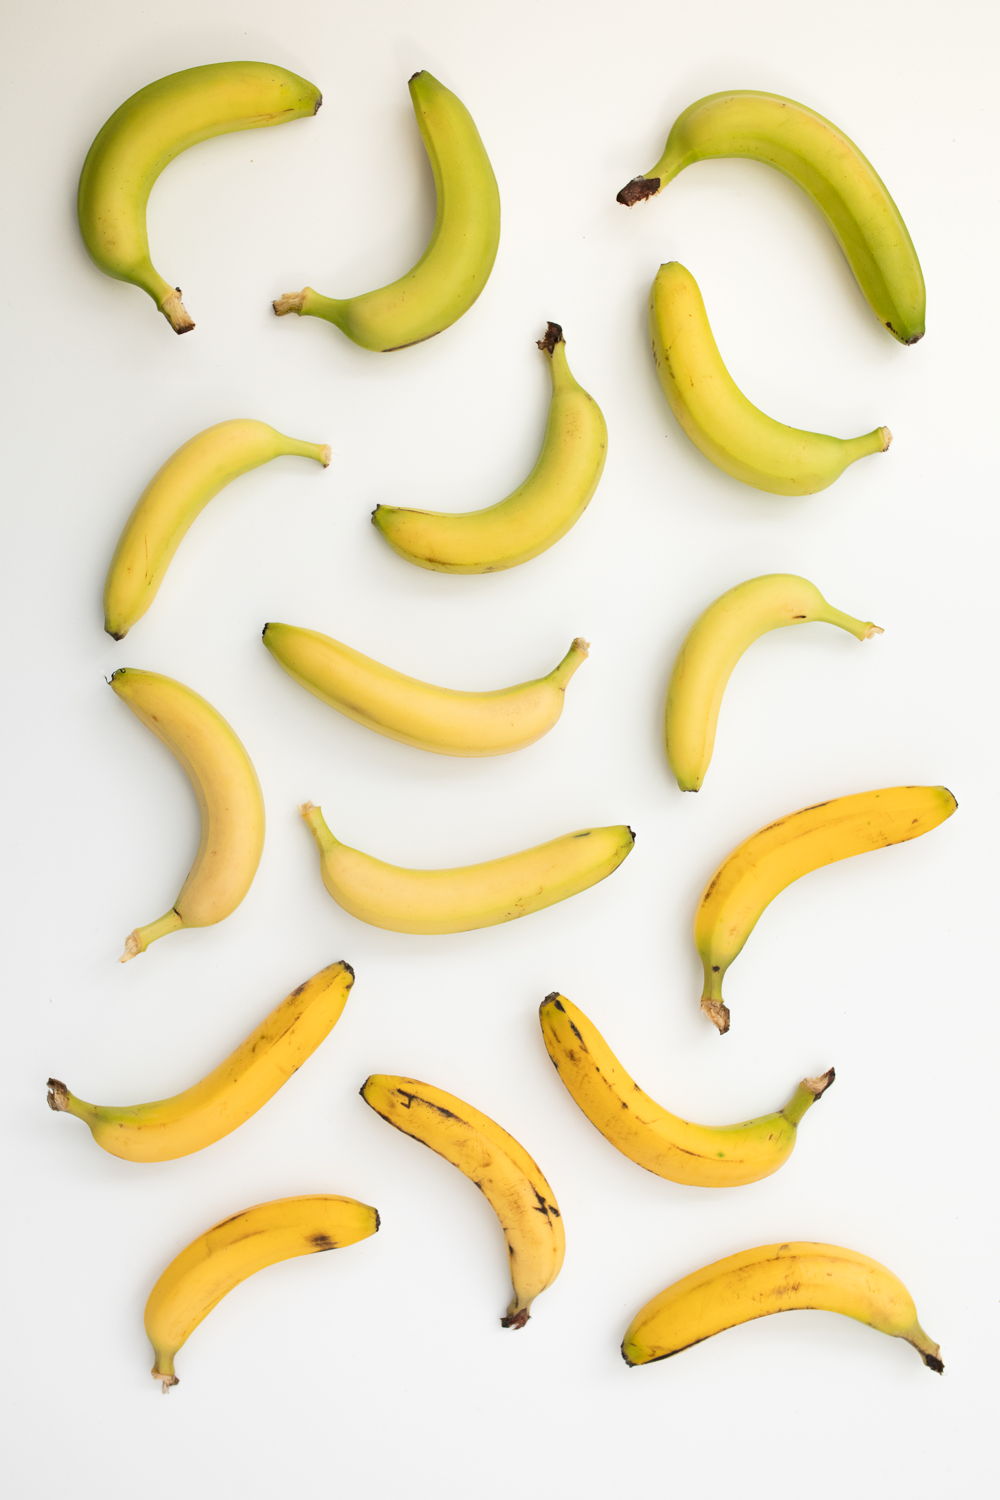 Bananas in multiple colours